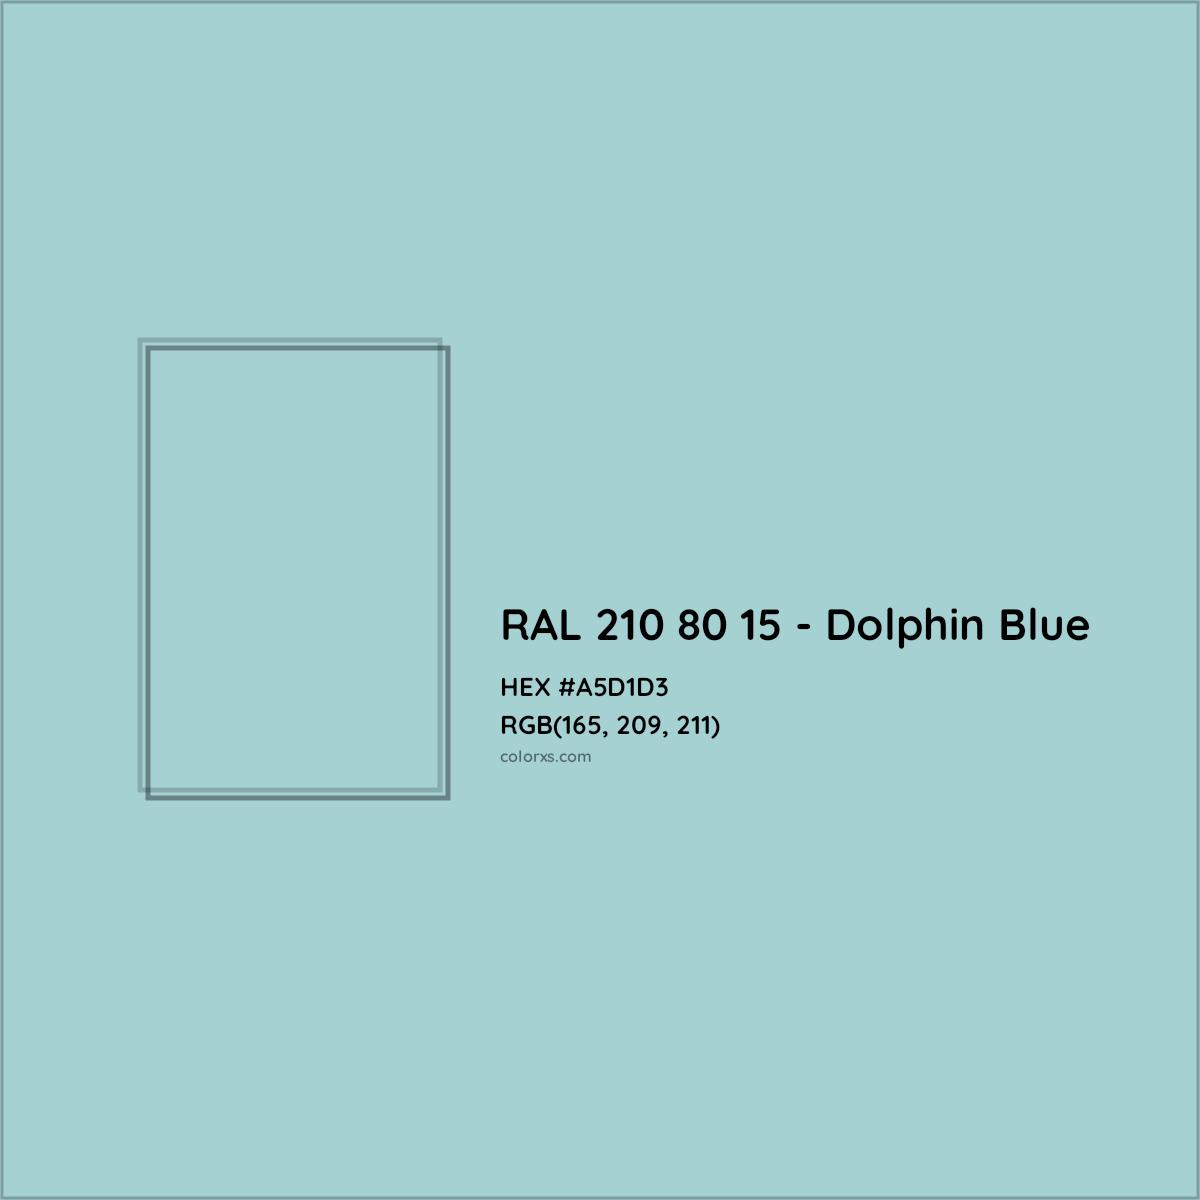 About Ral 210 80 15 Dolphin Blue Color Color Codes Similar Colors